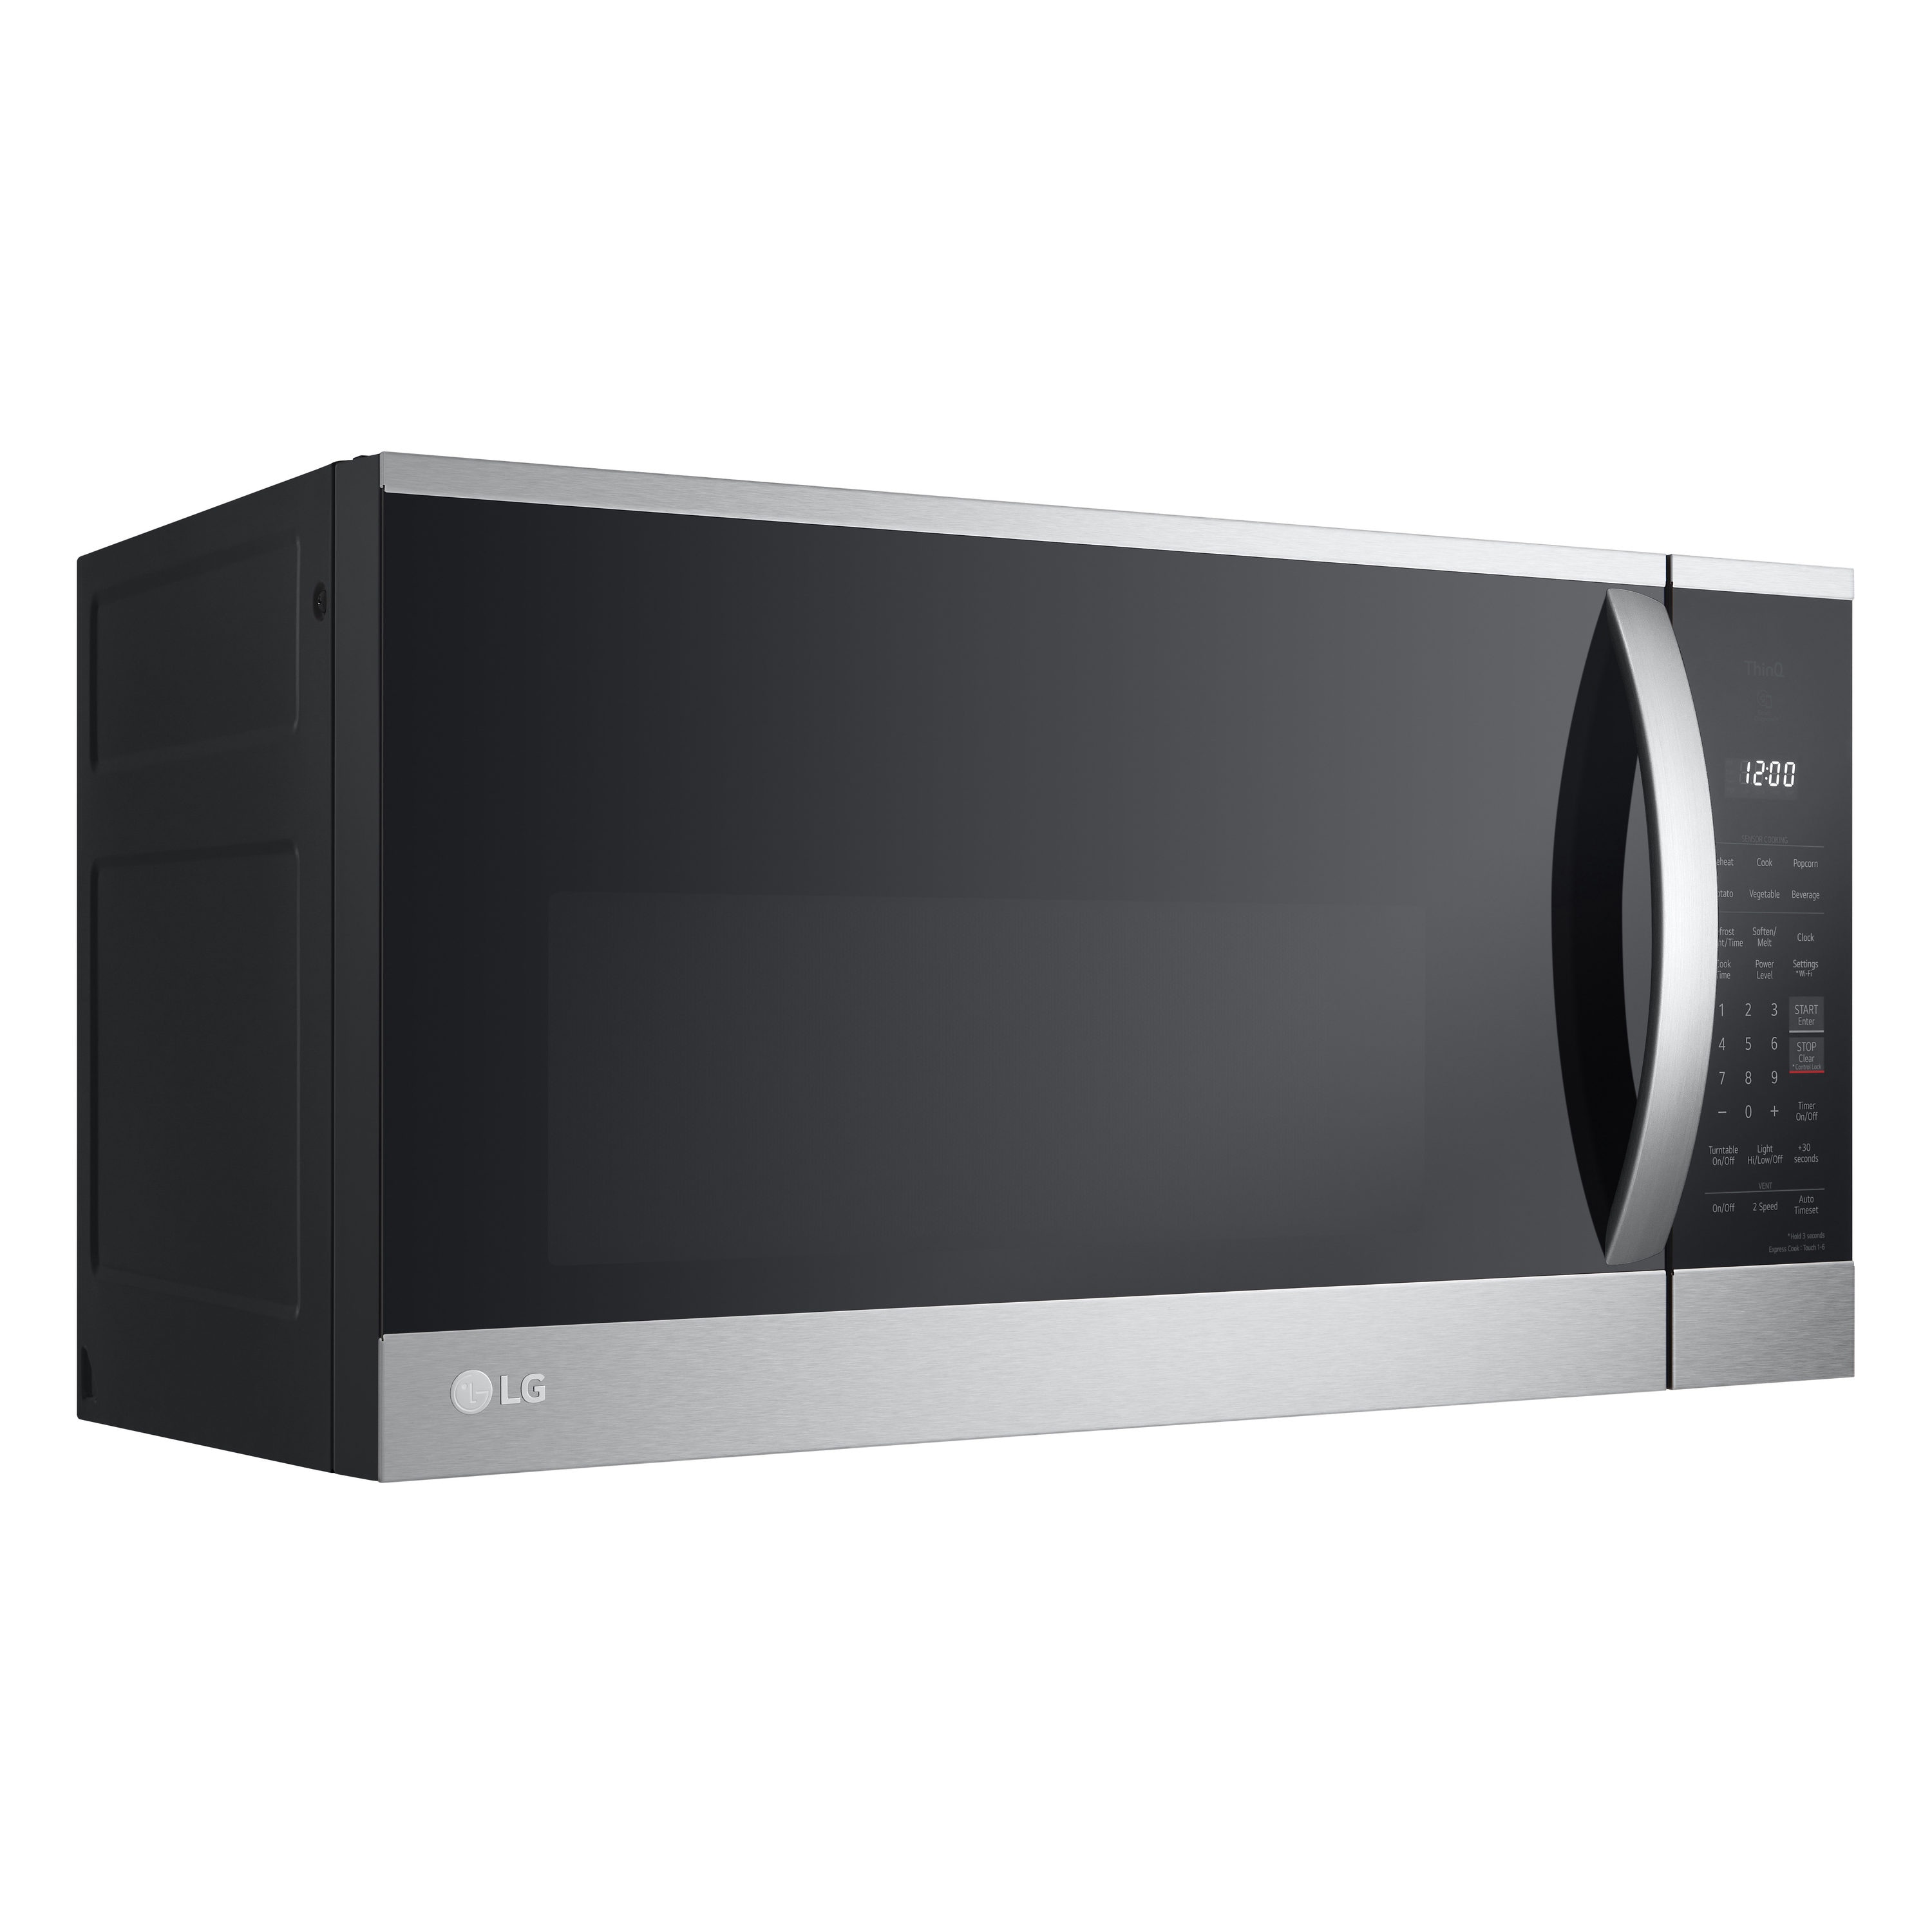 with (Printproof Microwaves Sensor ft Over-the-Range Stainless LG in the at Over-the-Range 1000-Watt Cooking Microwave department Smart 1.8-cu Steel)